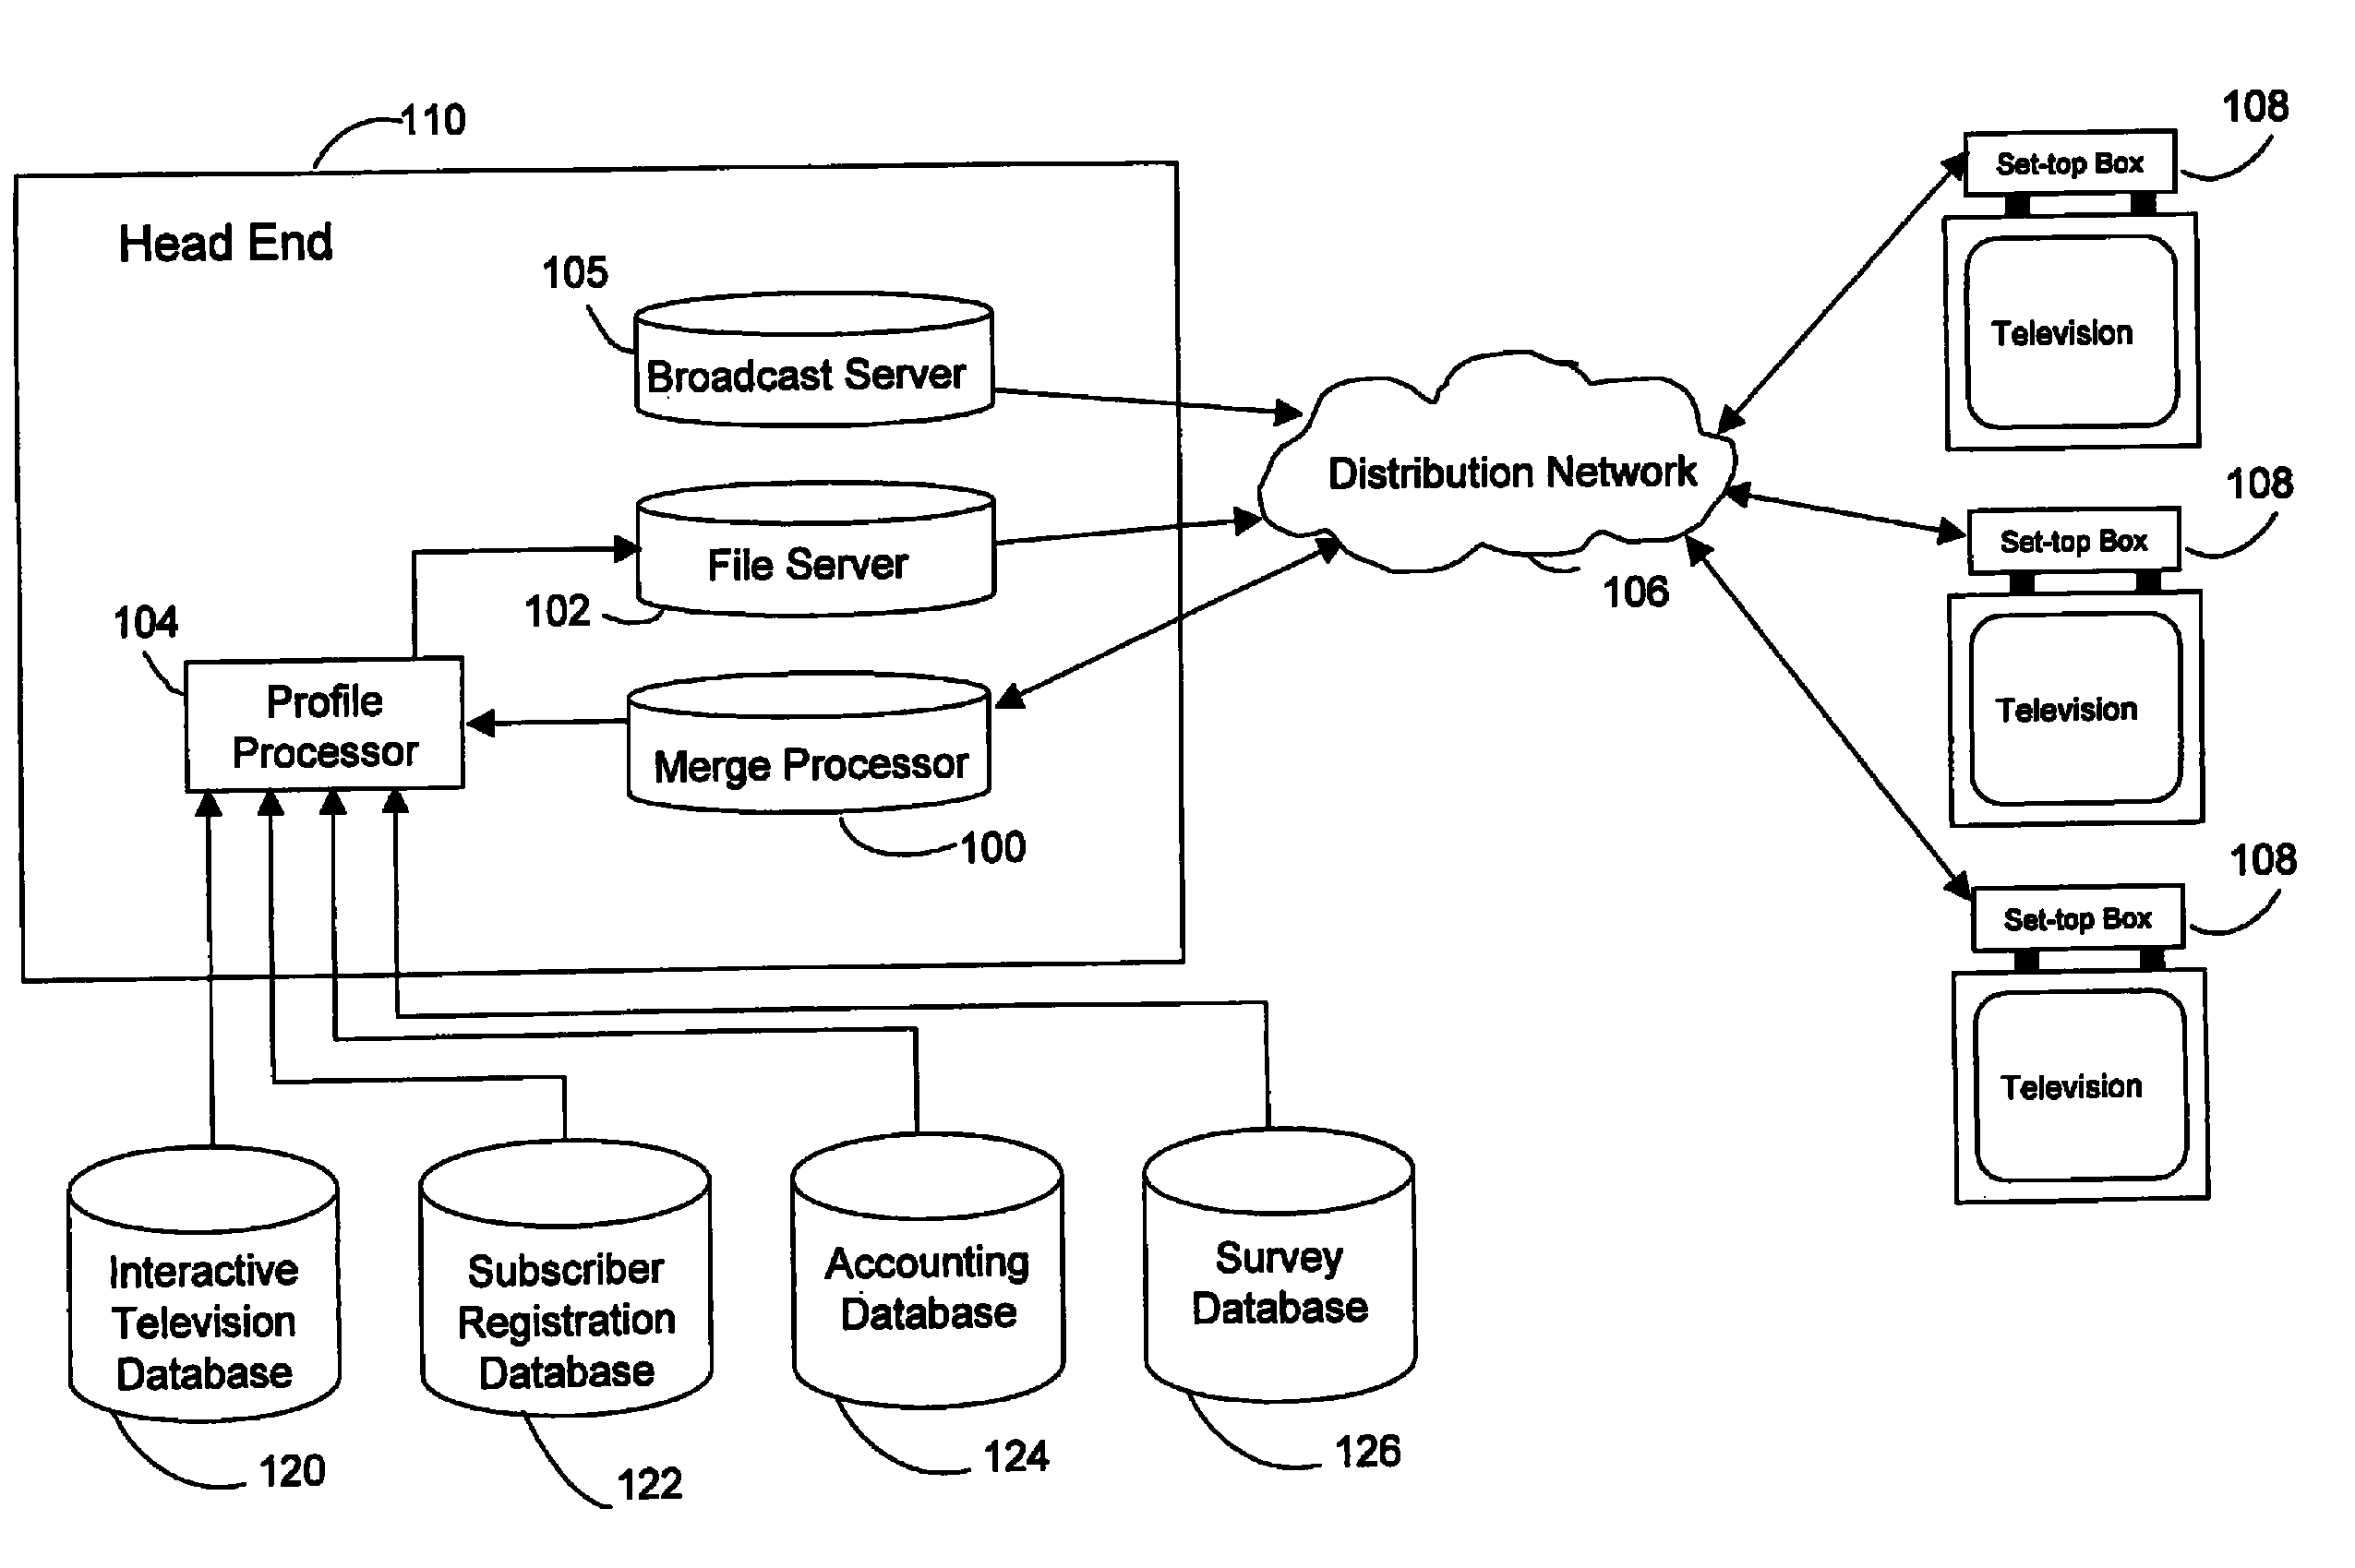 Methods and systems for providing targeted content